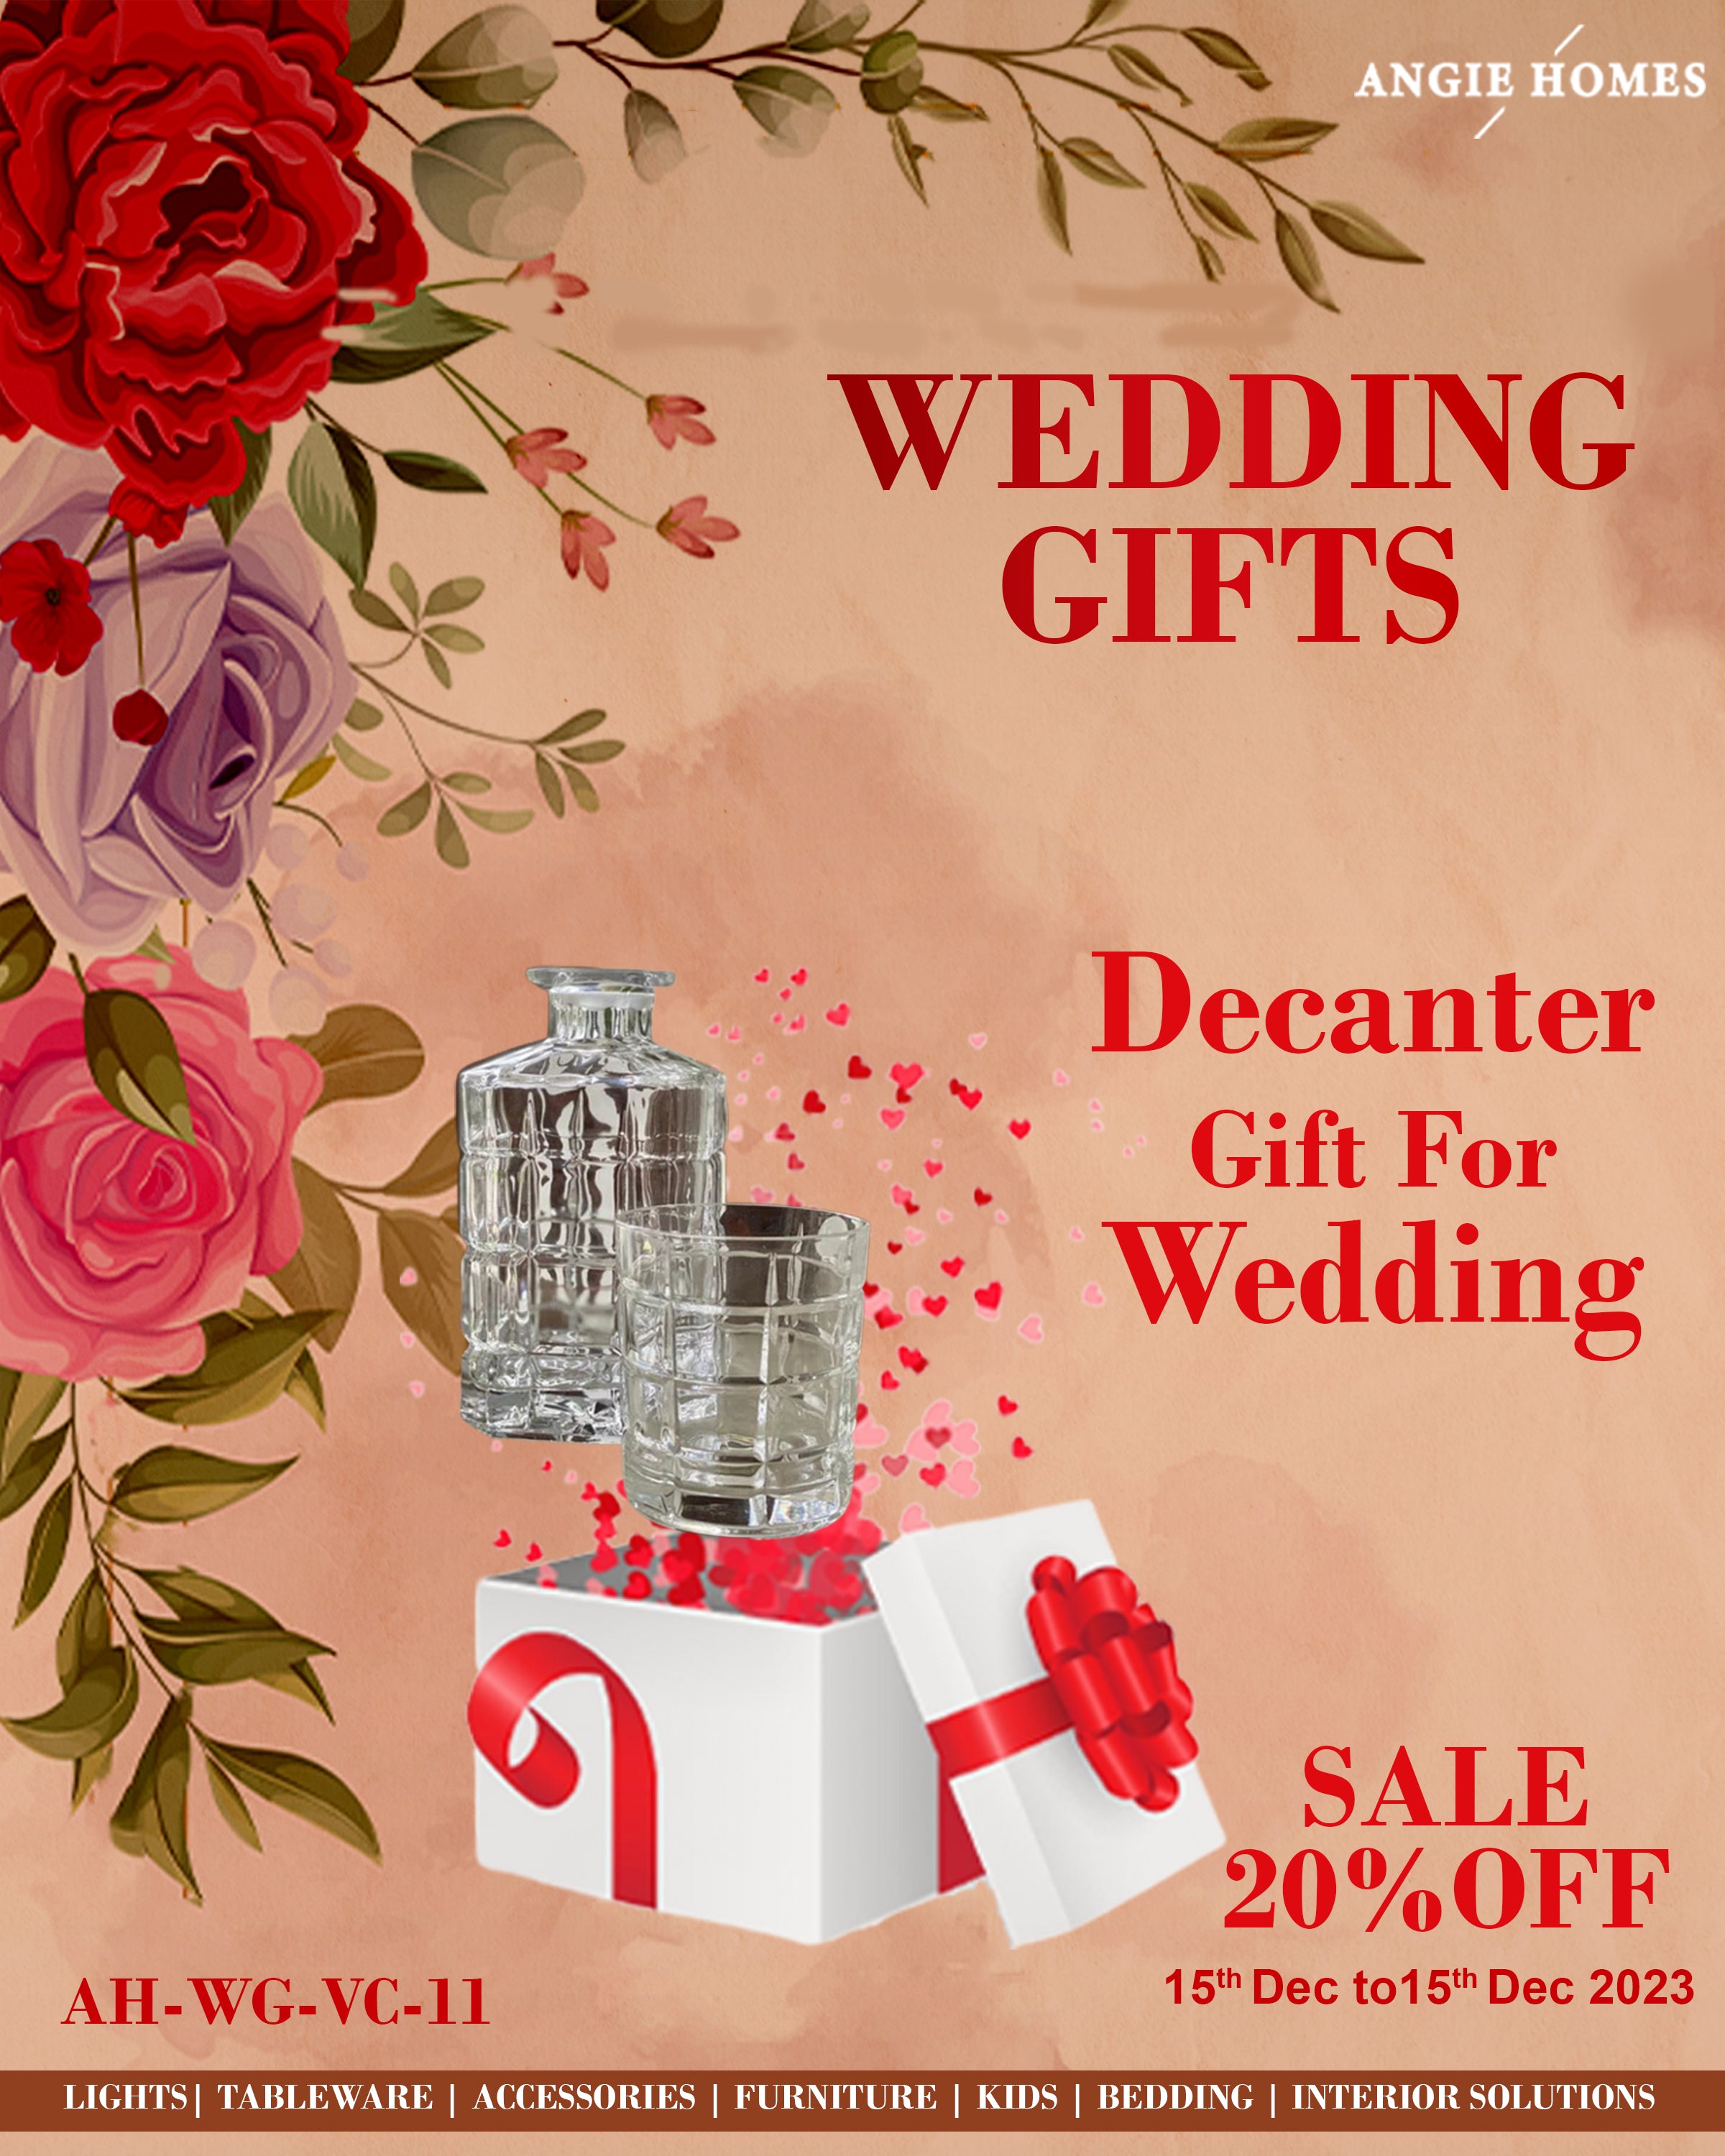 WHISKEY DECANTER FOR WEDDING GIFTS | MARRIAGE GIFT VOUCHER CARD | RETURN GIFTTING CARD ANGIE HOMES